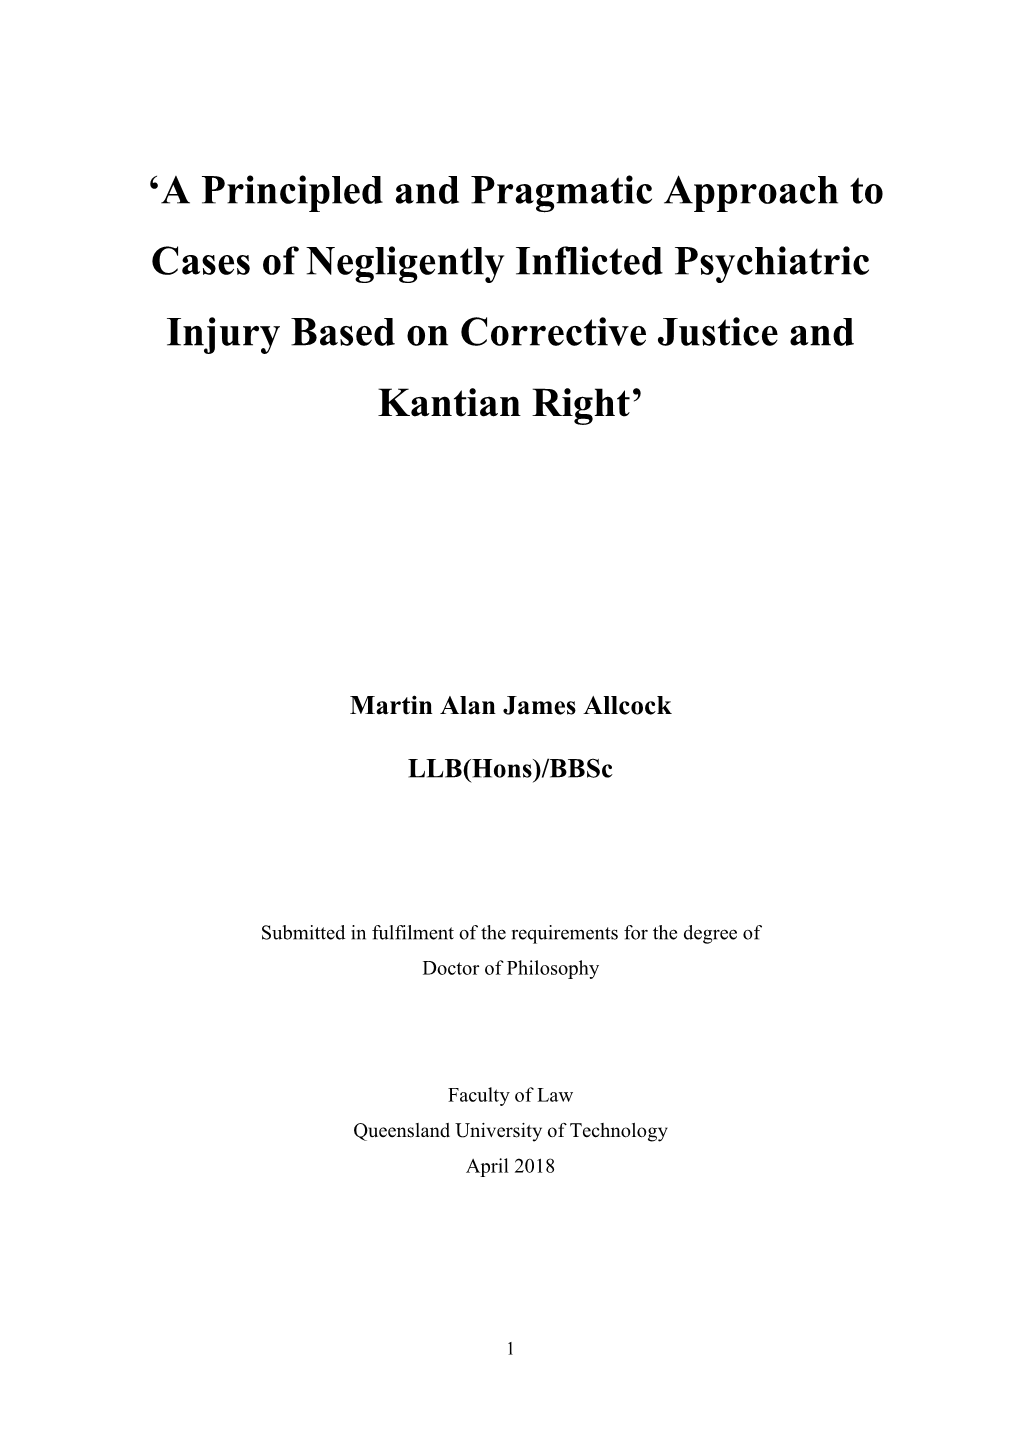 'A Principled and Pragmatic Approach to Cases of Negligently Inflicted